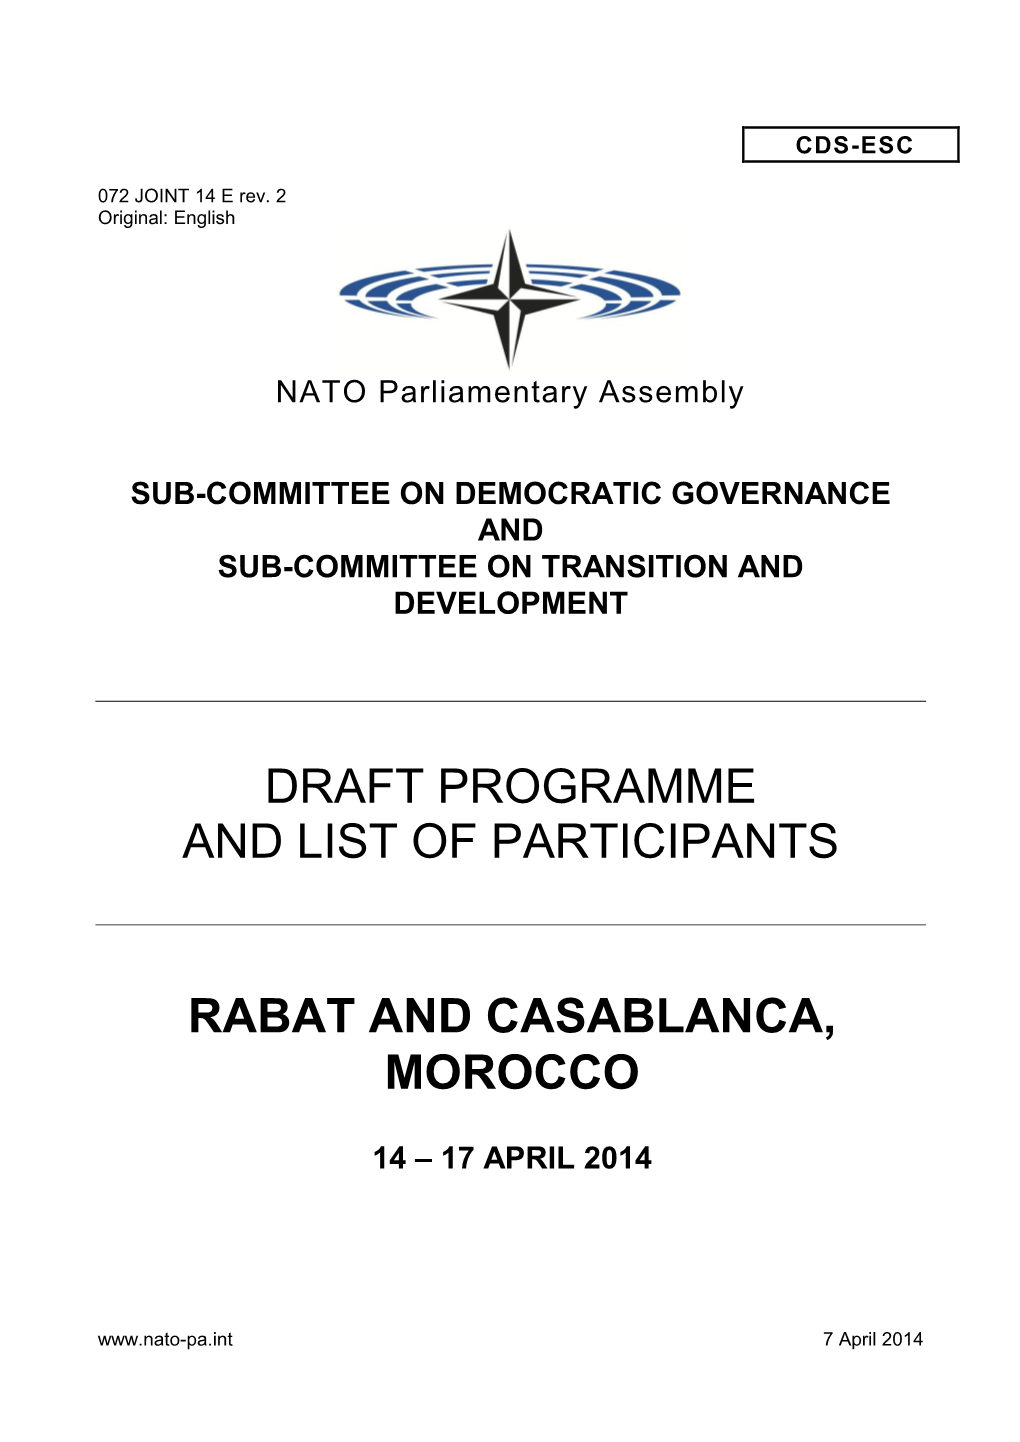 Draft Programme and List of Participants Rabat and Casablanca, Morocco